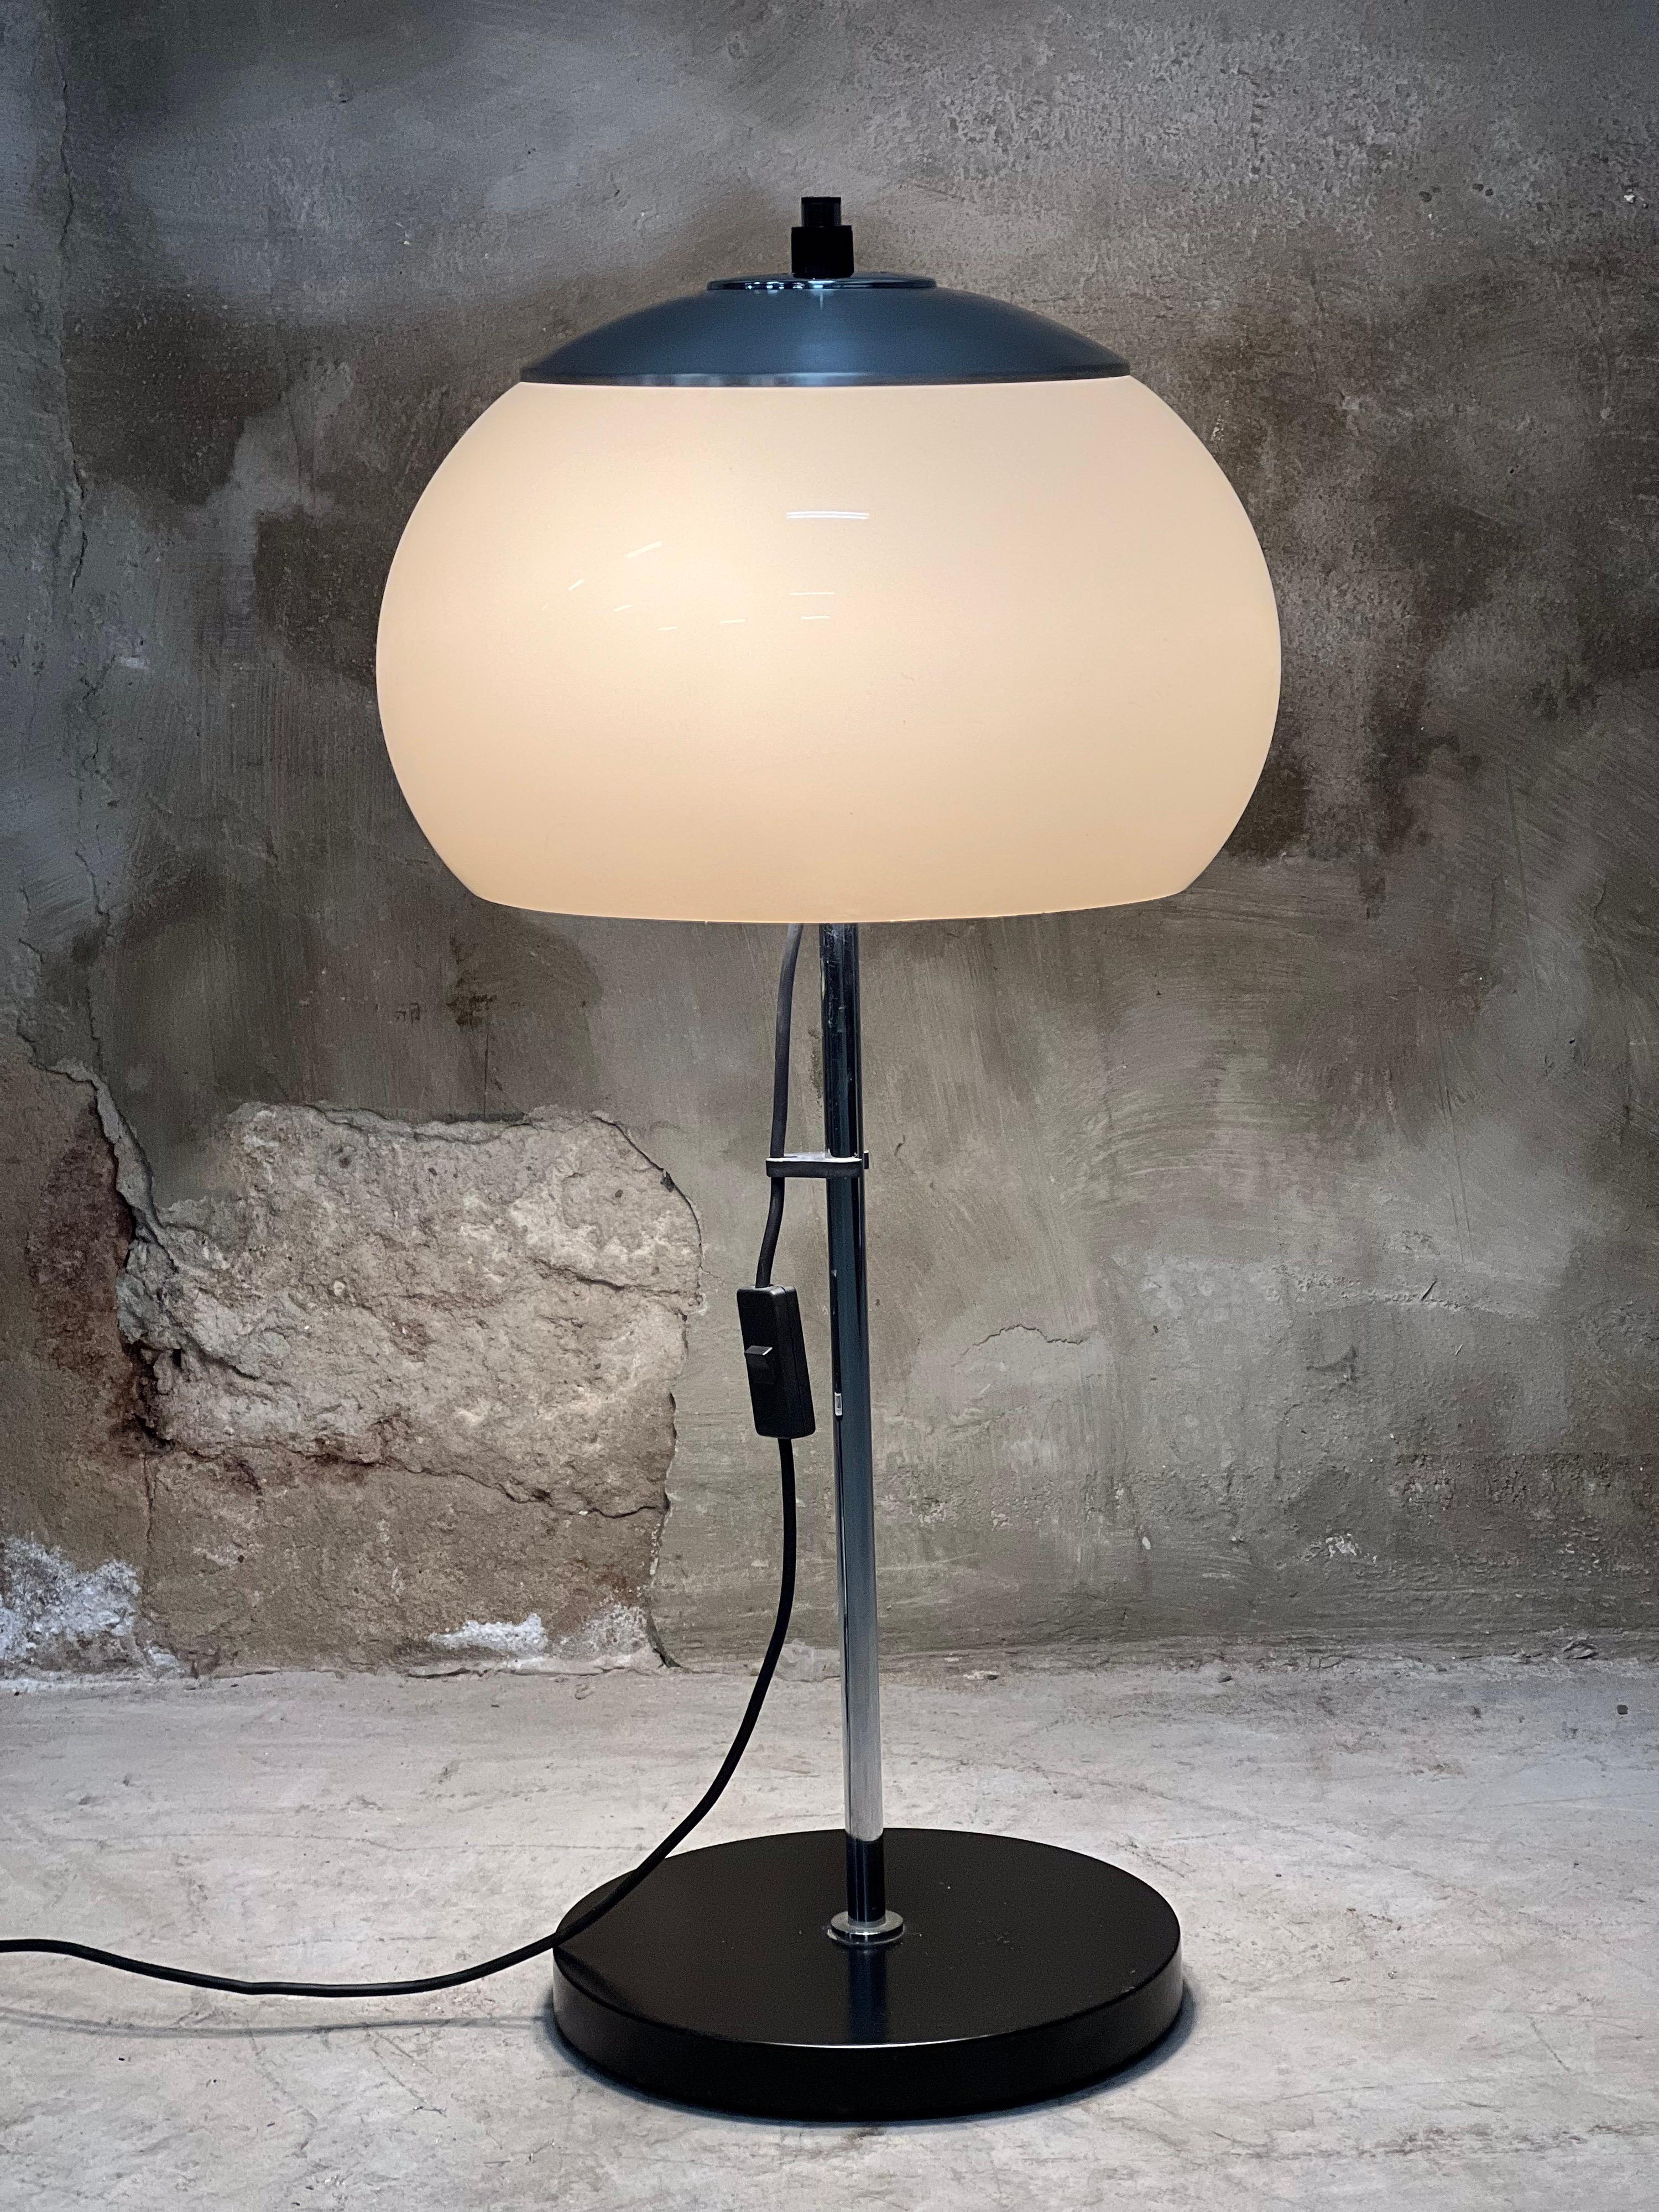 Picture of a lamp, Dijkstra Haarlem, 1960s/1970s. Still in very nice condition. Provides nice warm light with its plexiglass shade. Furthermore, metal, adjustable in height and works on 2 x E27 large fitting lamp (exclusive).

The whole is 75 cm